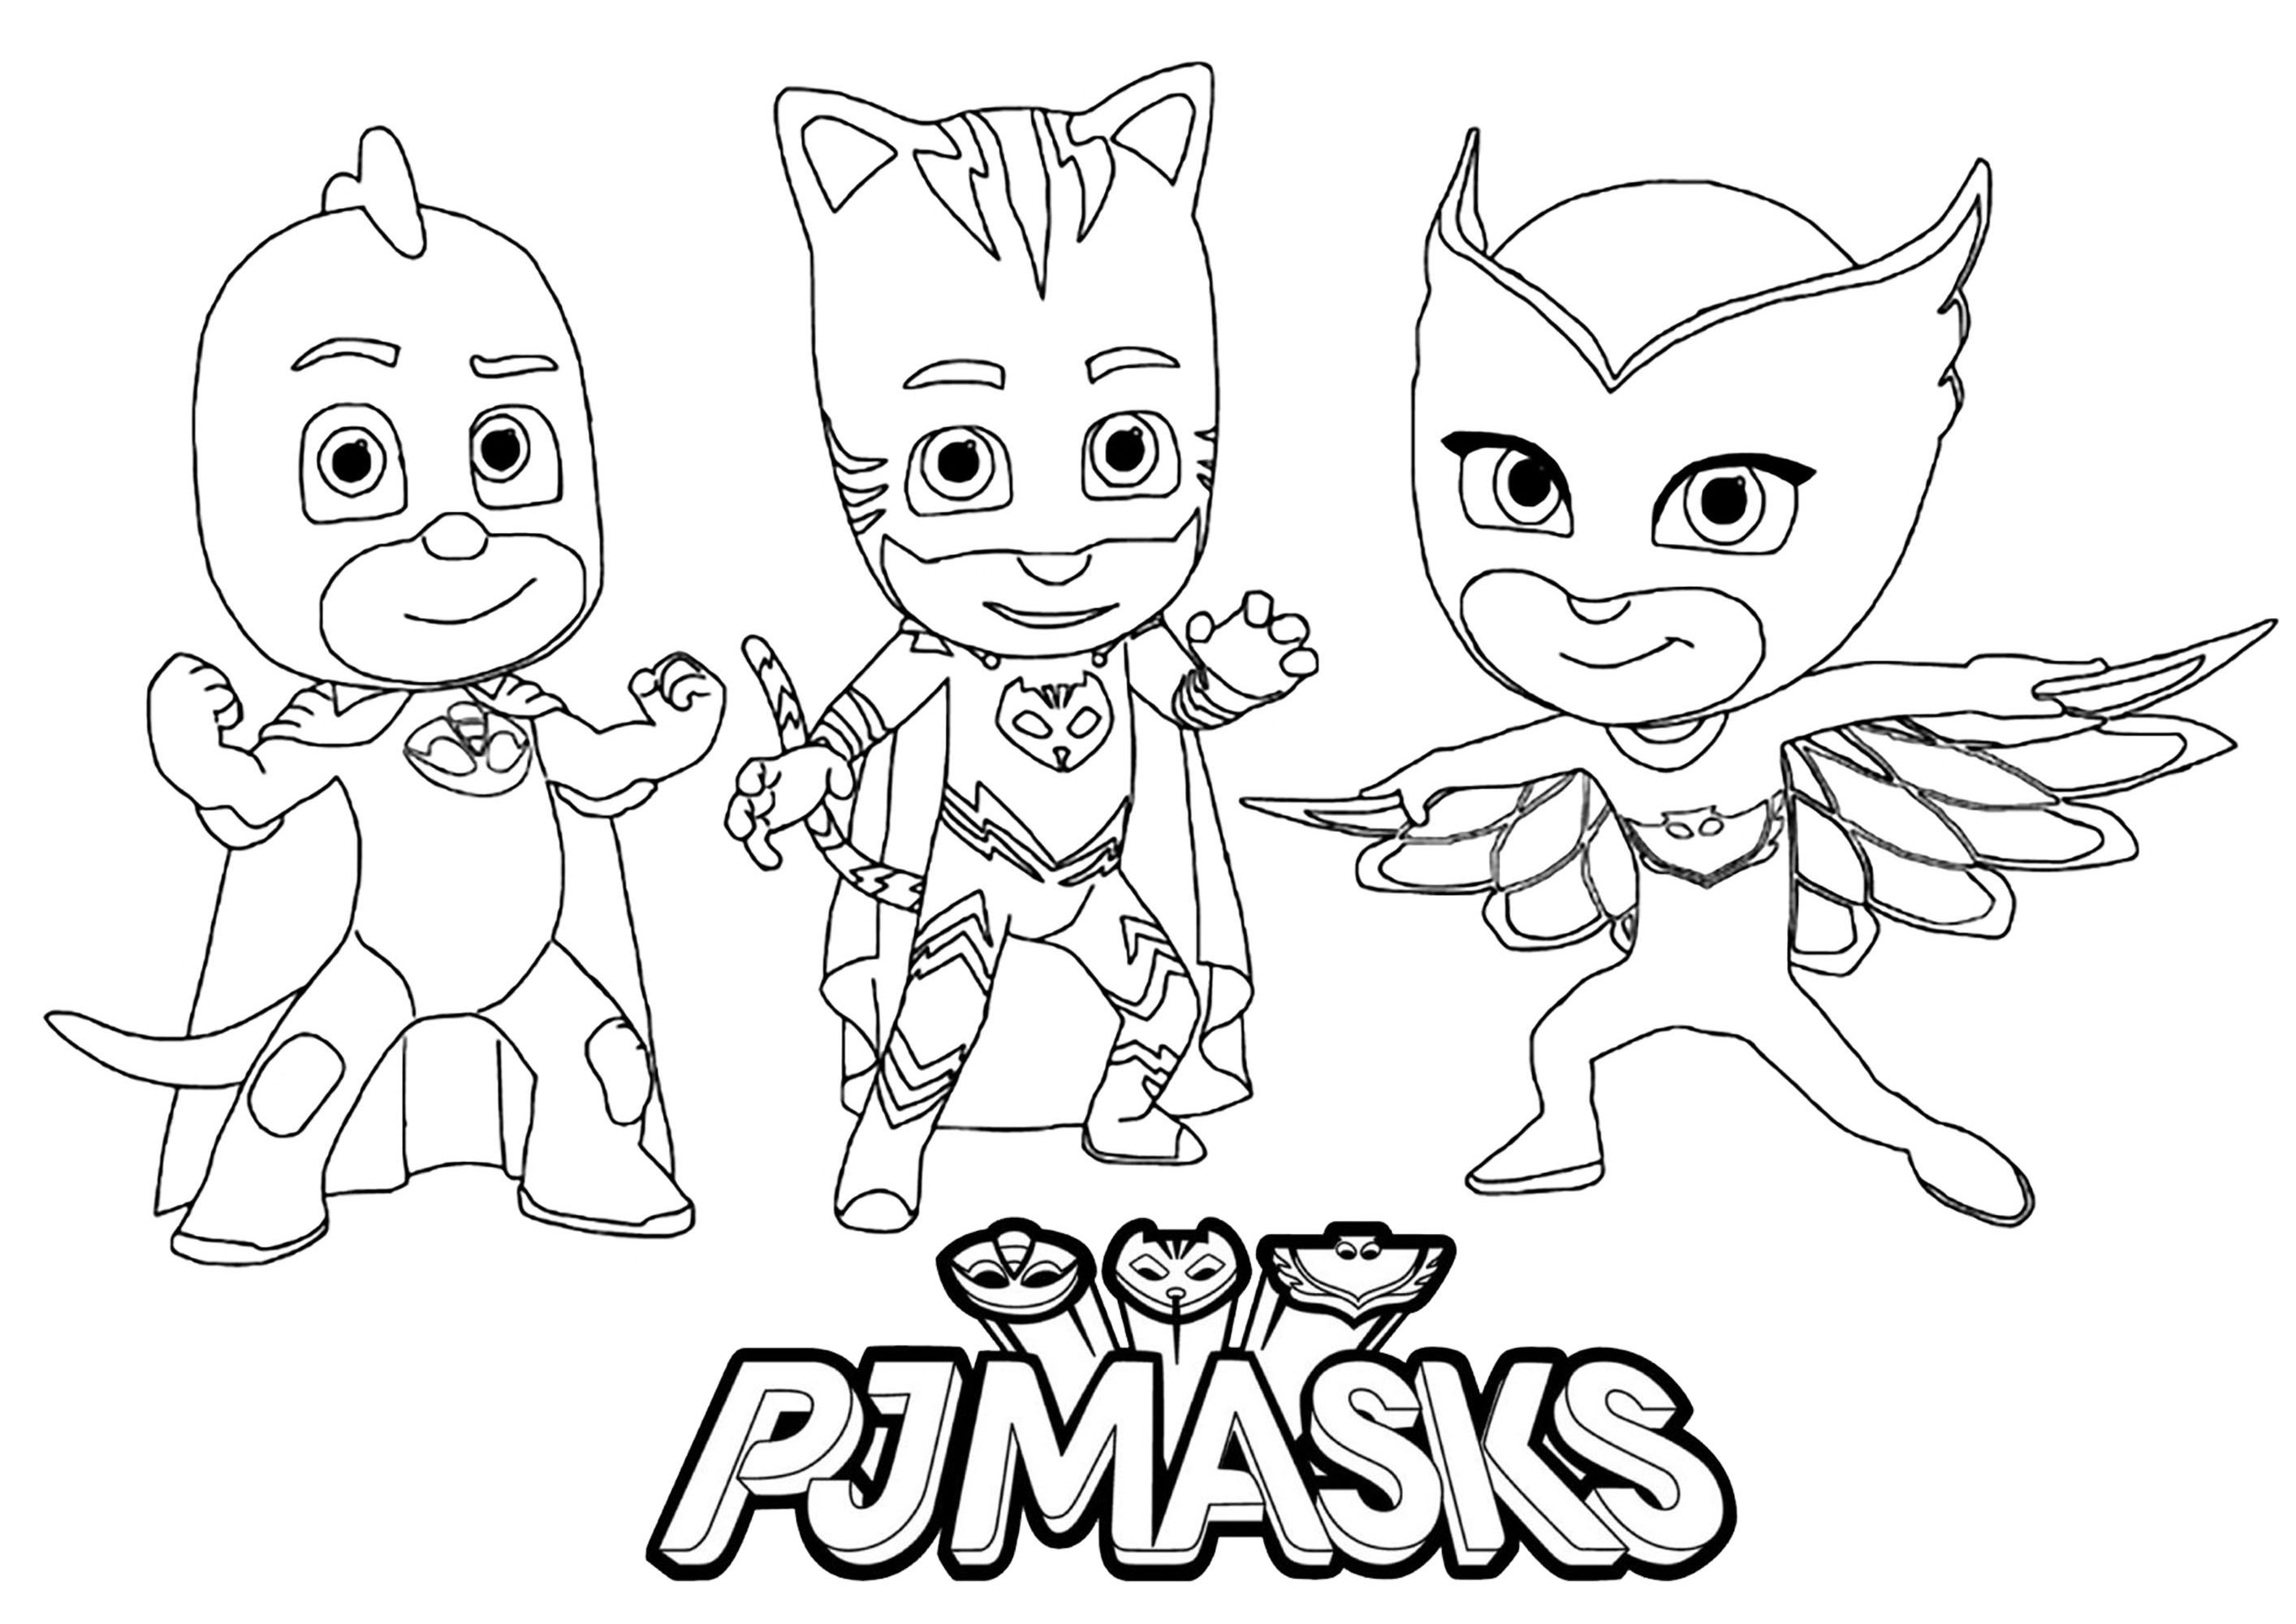 Pj masks to download for free